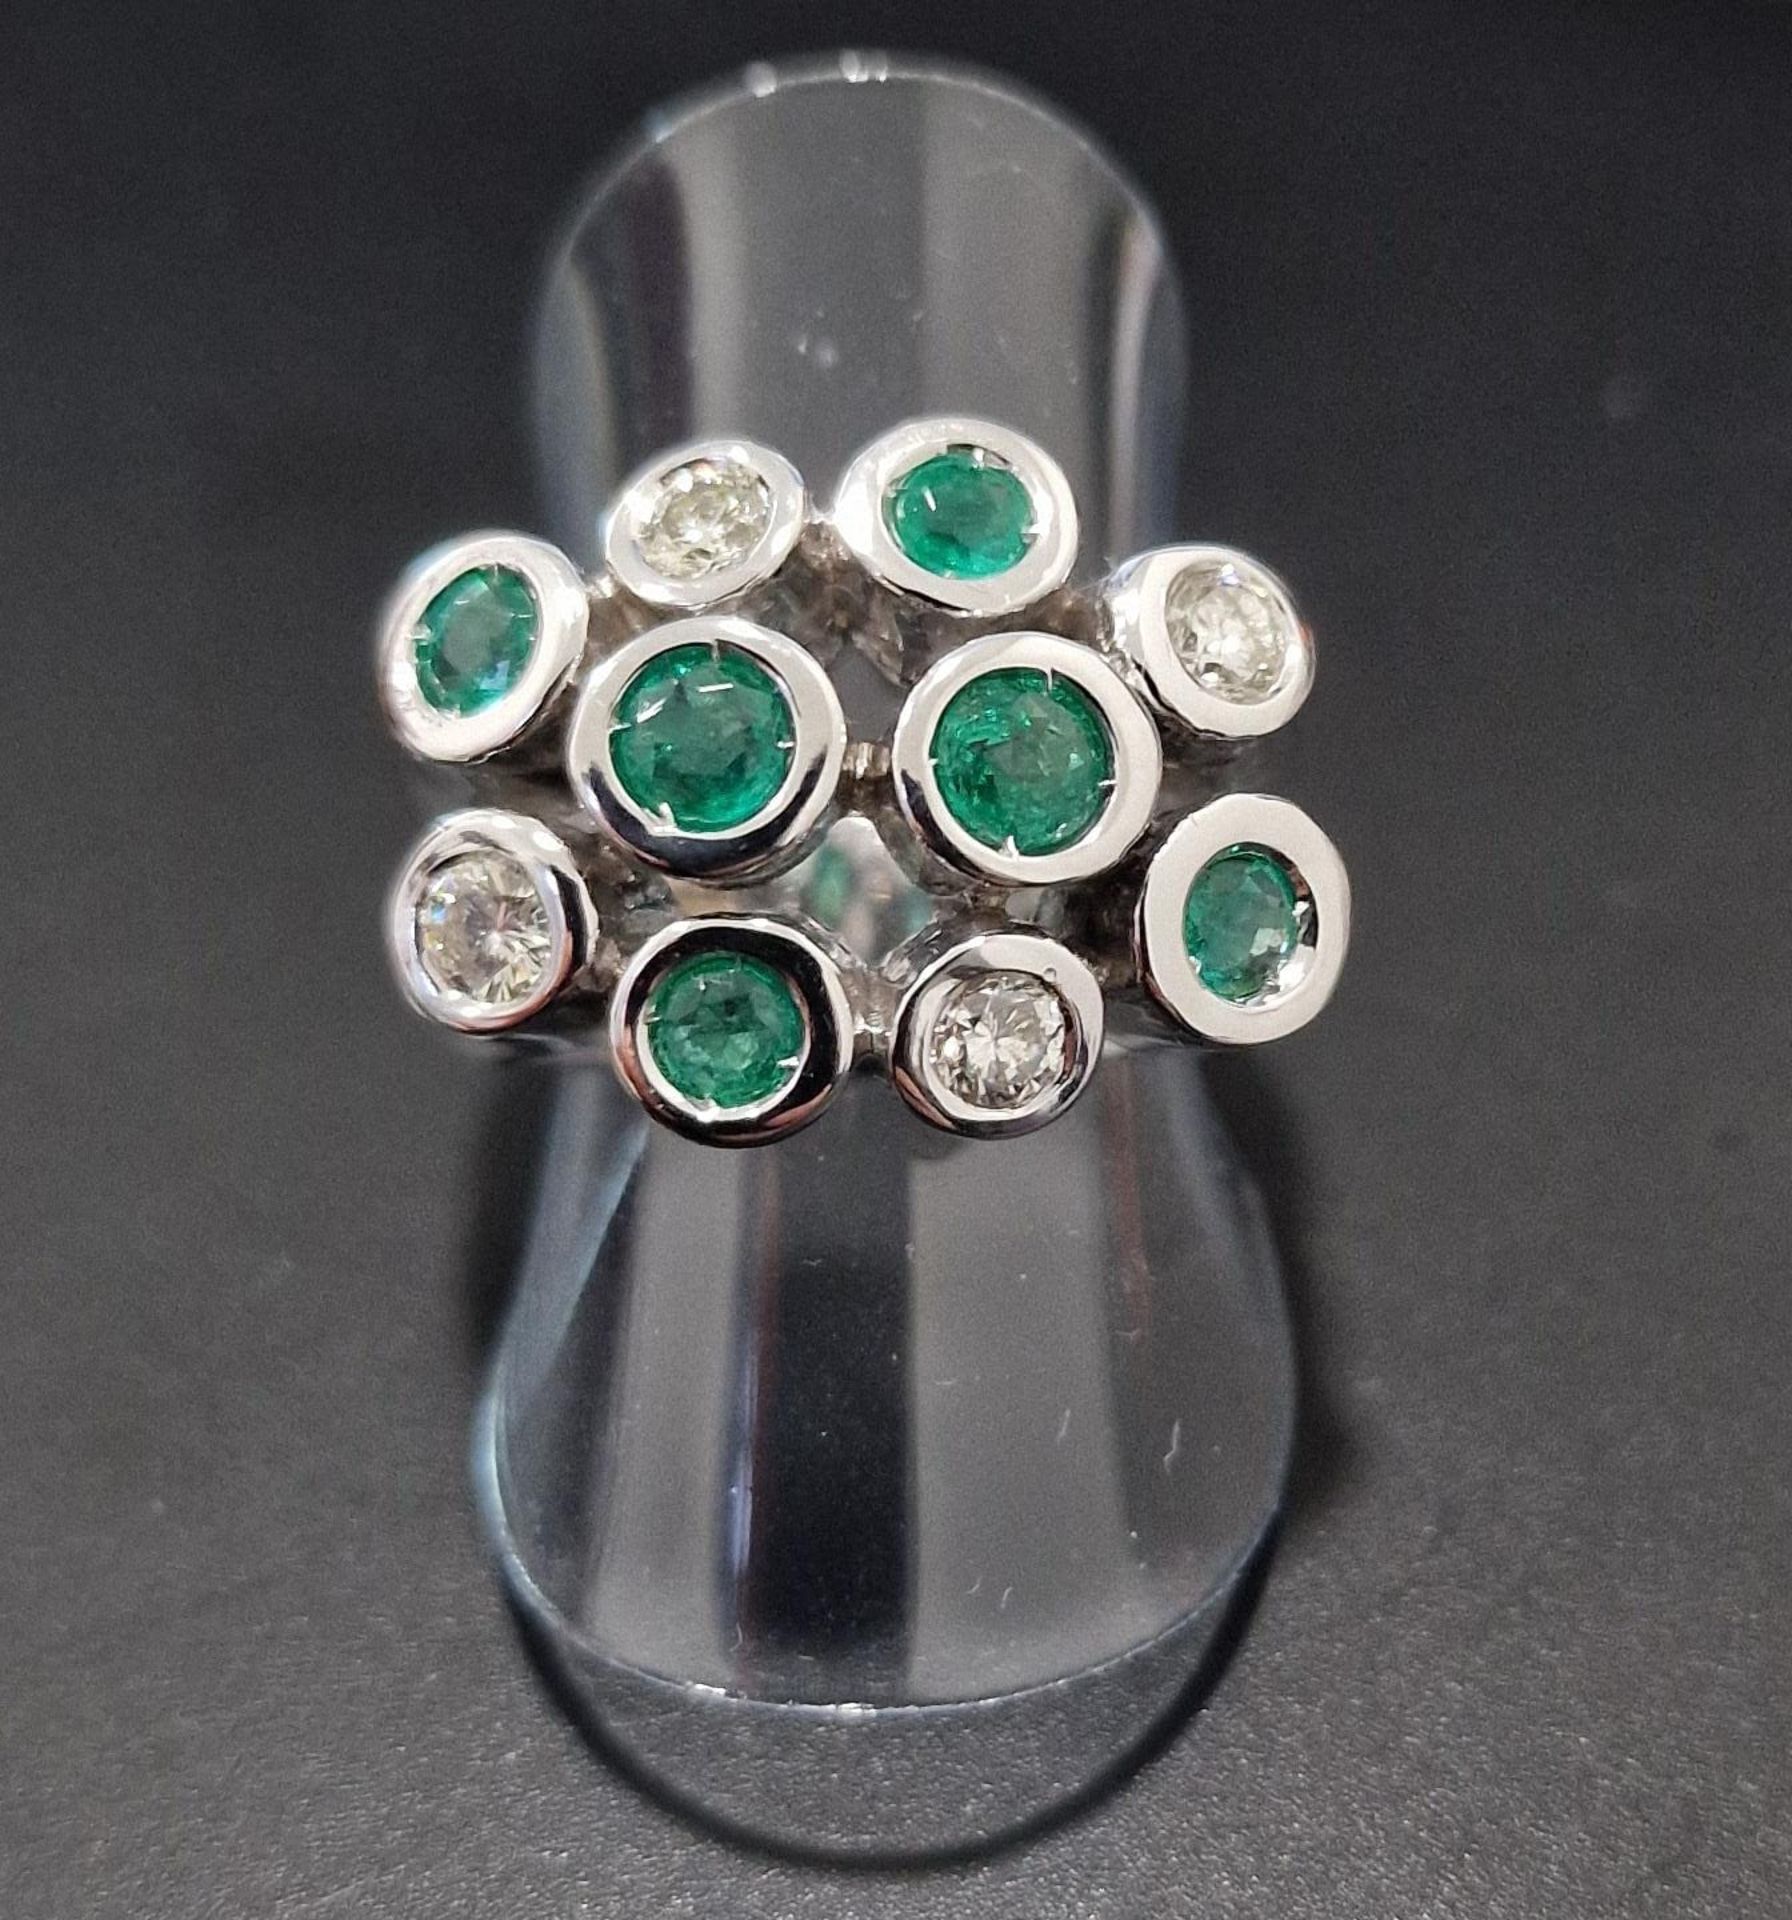 2.00CT EMERALD & DIAMOND RING - SET IN 18K GOLD (15.3g Total Weight)